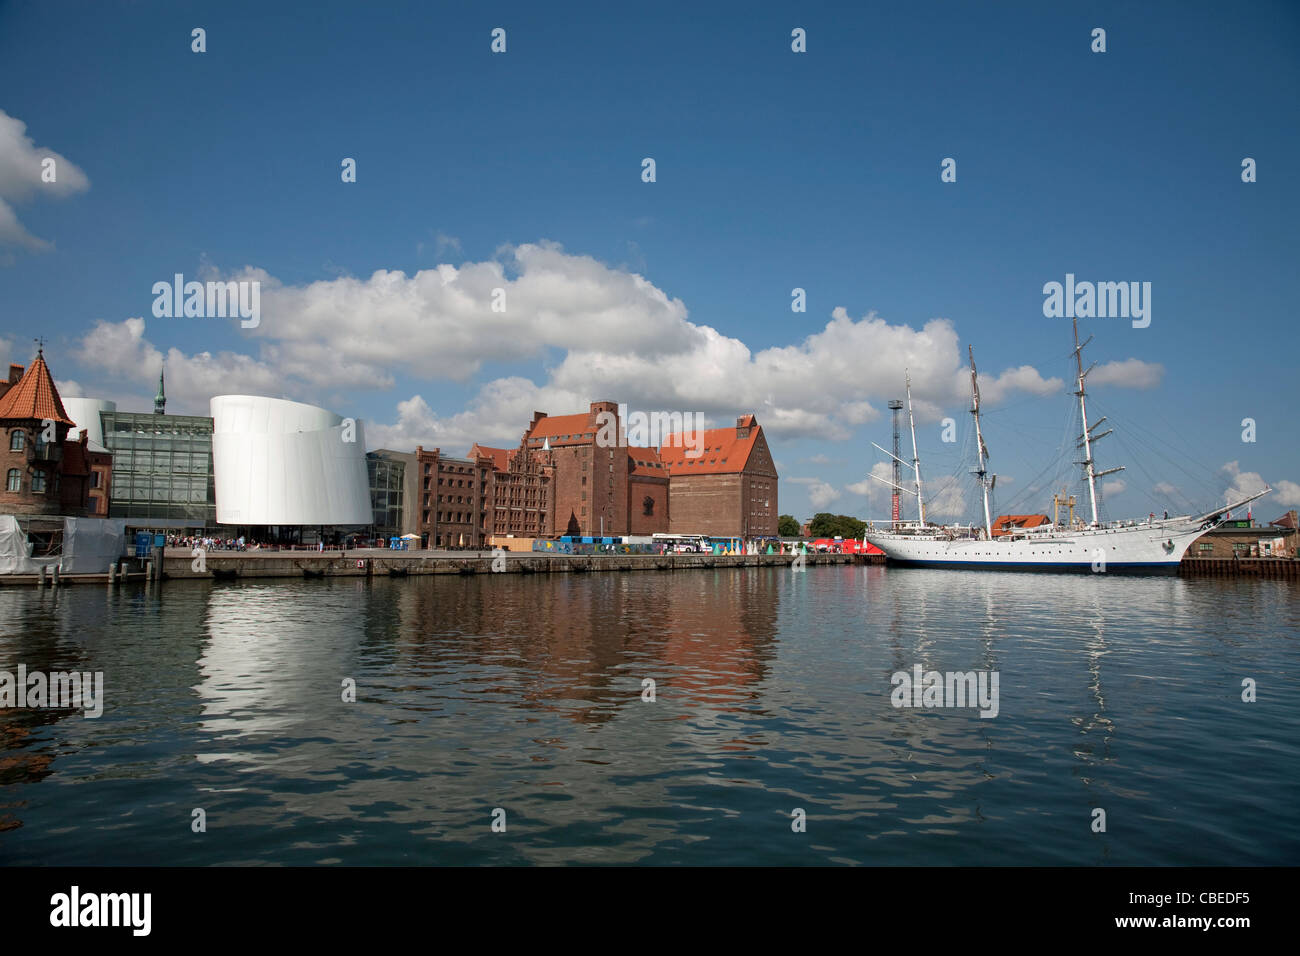 The port of Stralsund with the public aquarium Ozeaneum and the former German Reichsmarine Navy Sail Training ship Gorch Fock Stock Photo